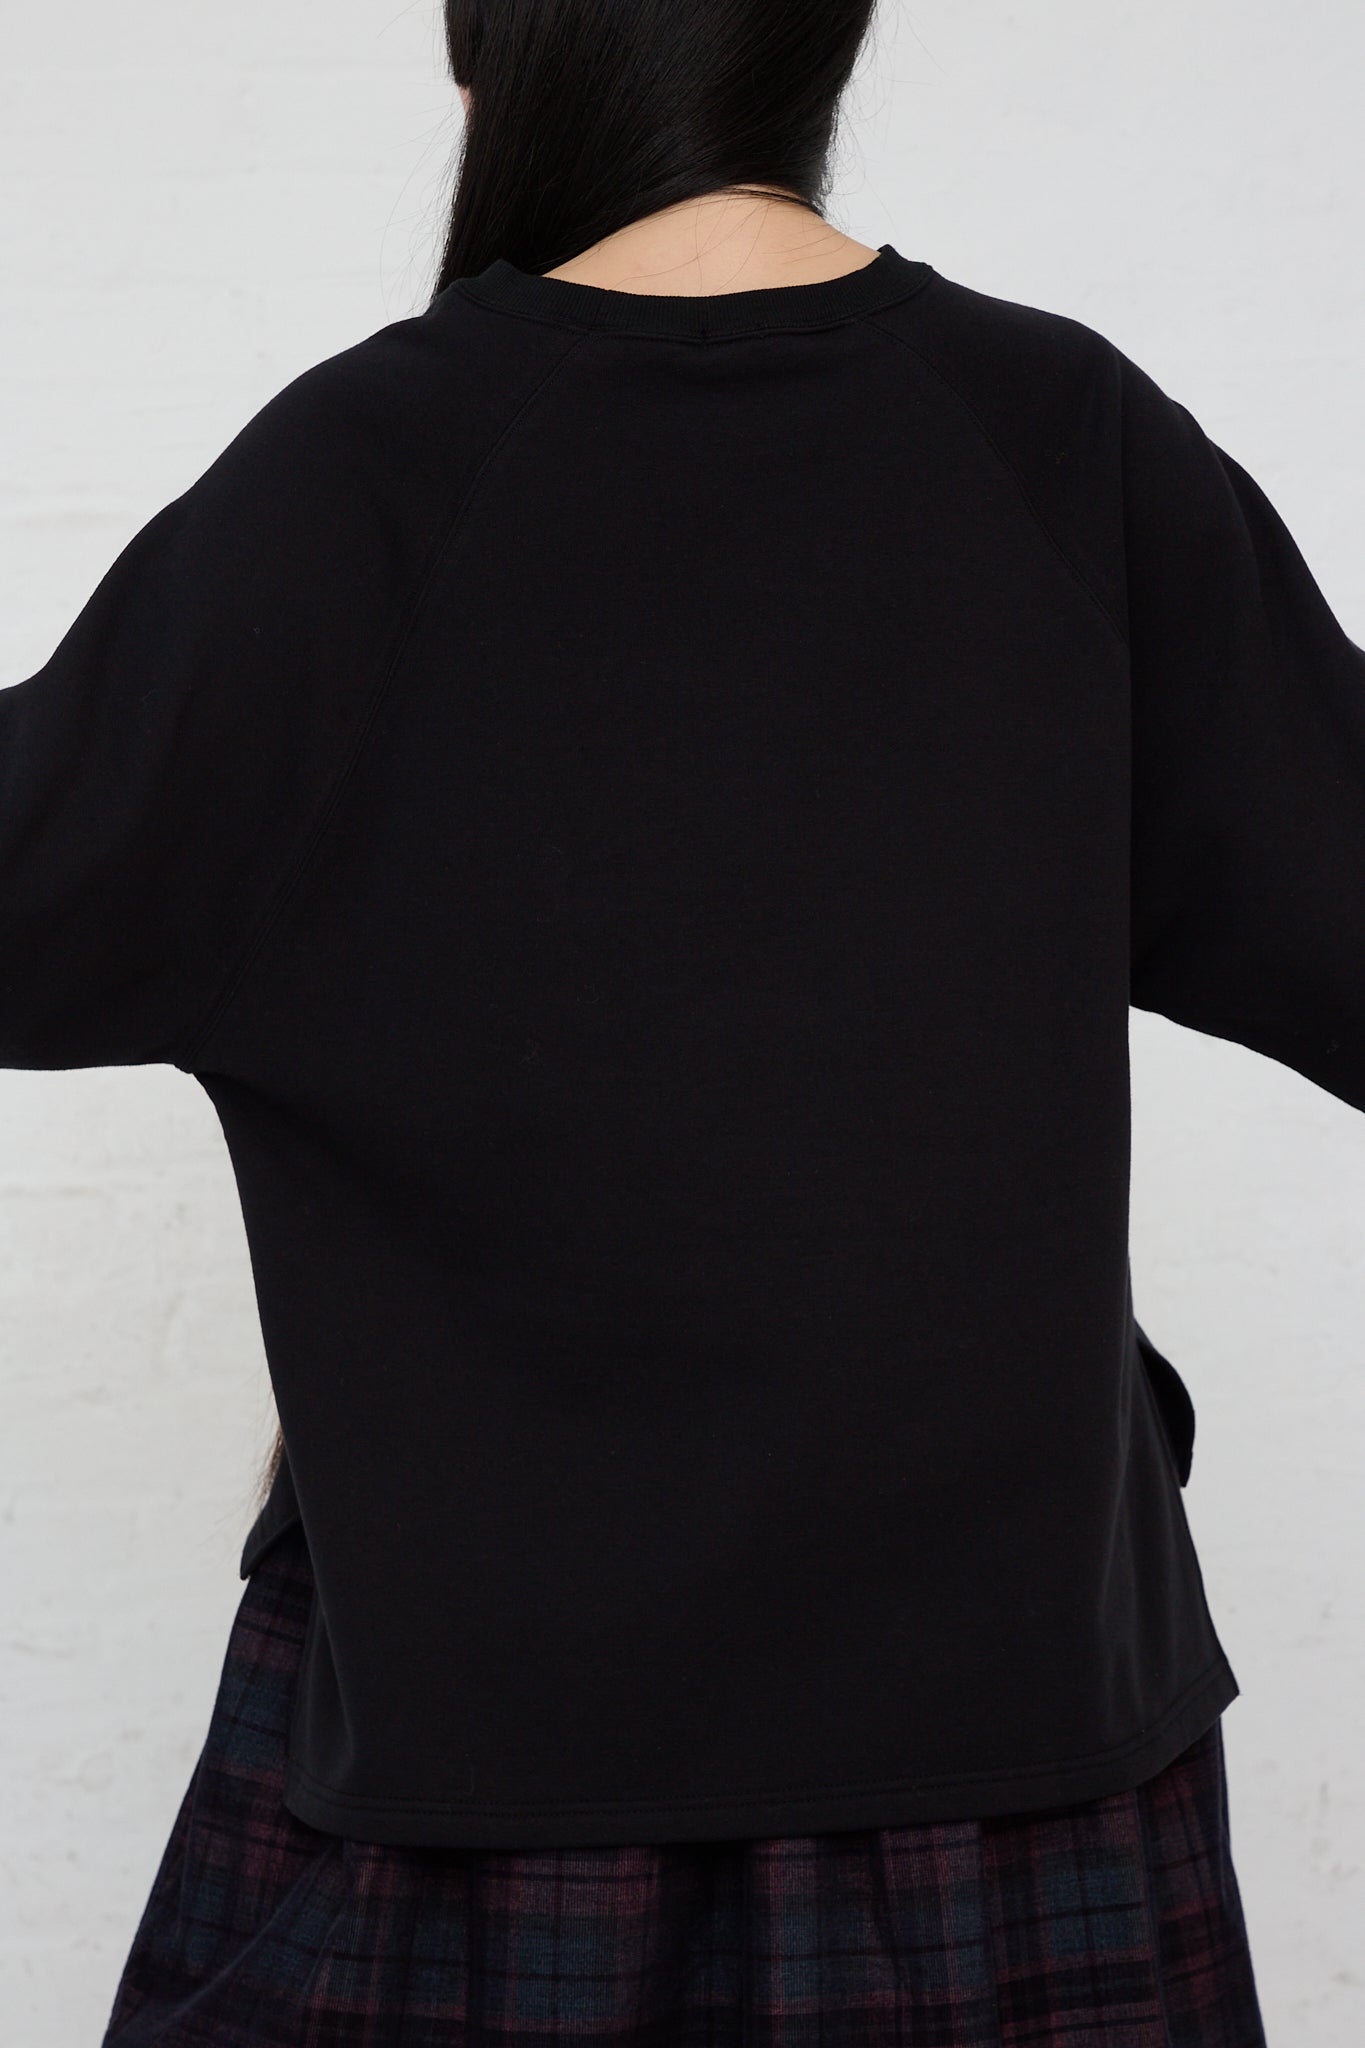 The back of a woman wearing an Ichi Cotton Knit Pullover in Black.